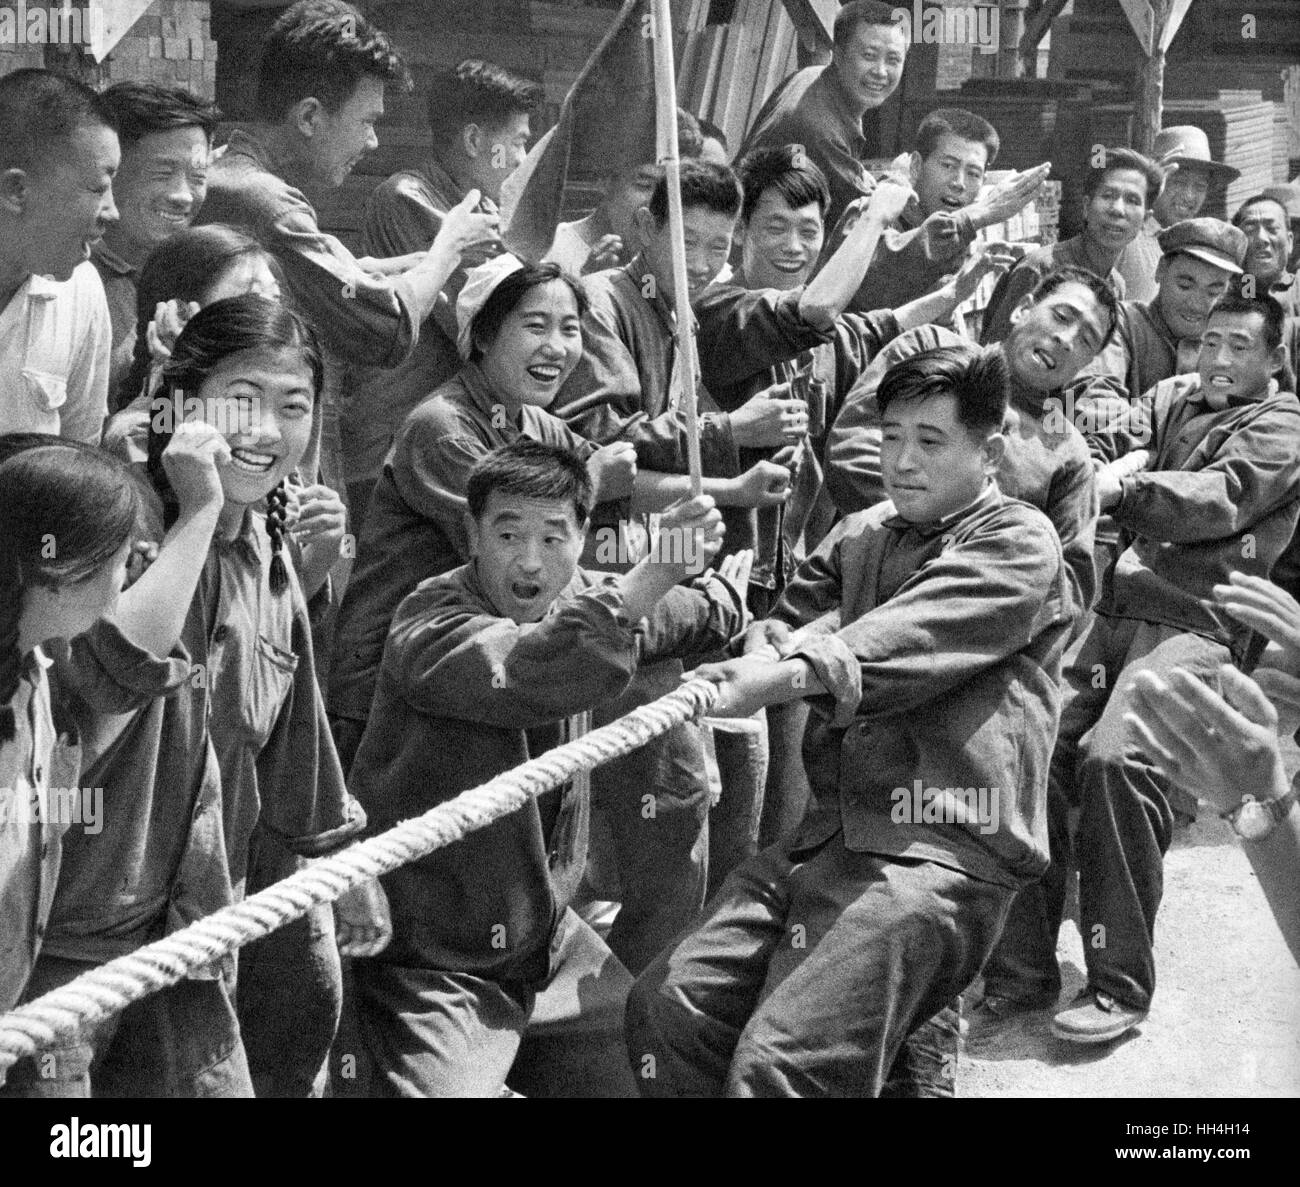 Workers having fun taking part in a tug of war session during the Cultural Revolution era in Communist China. Stock Photo